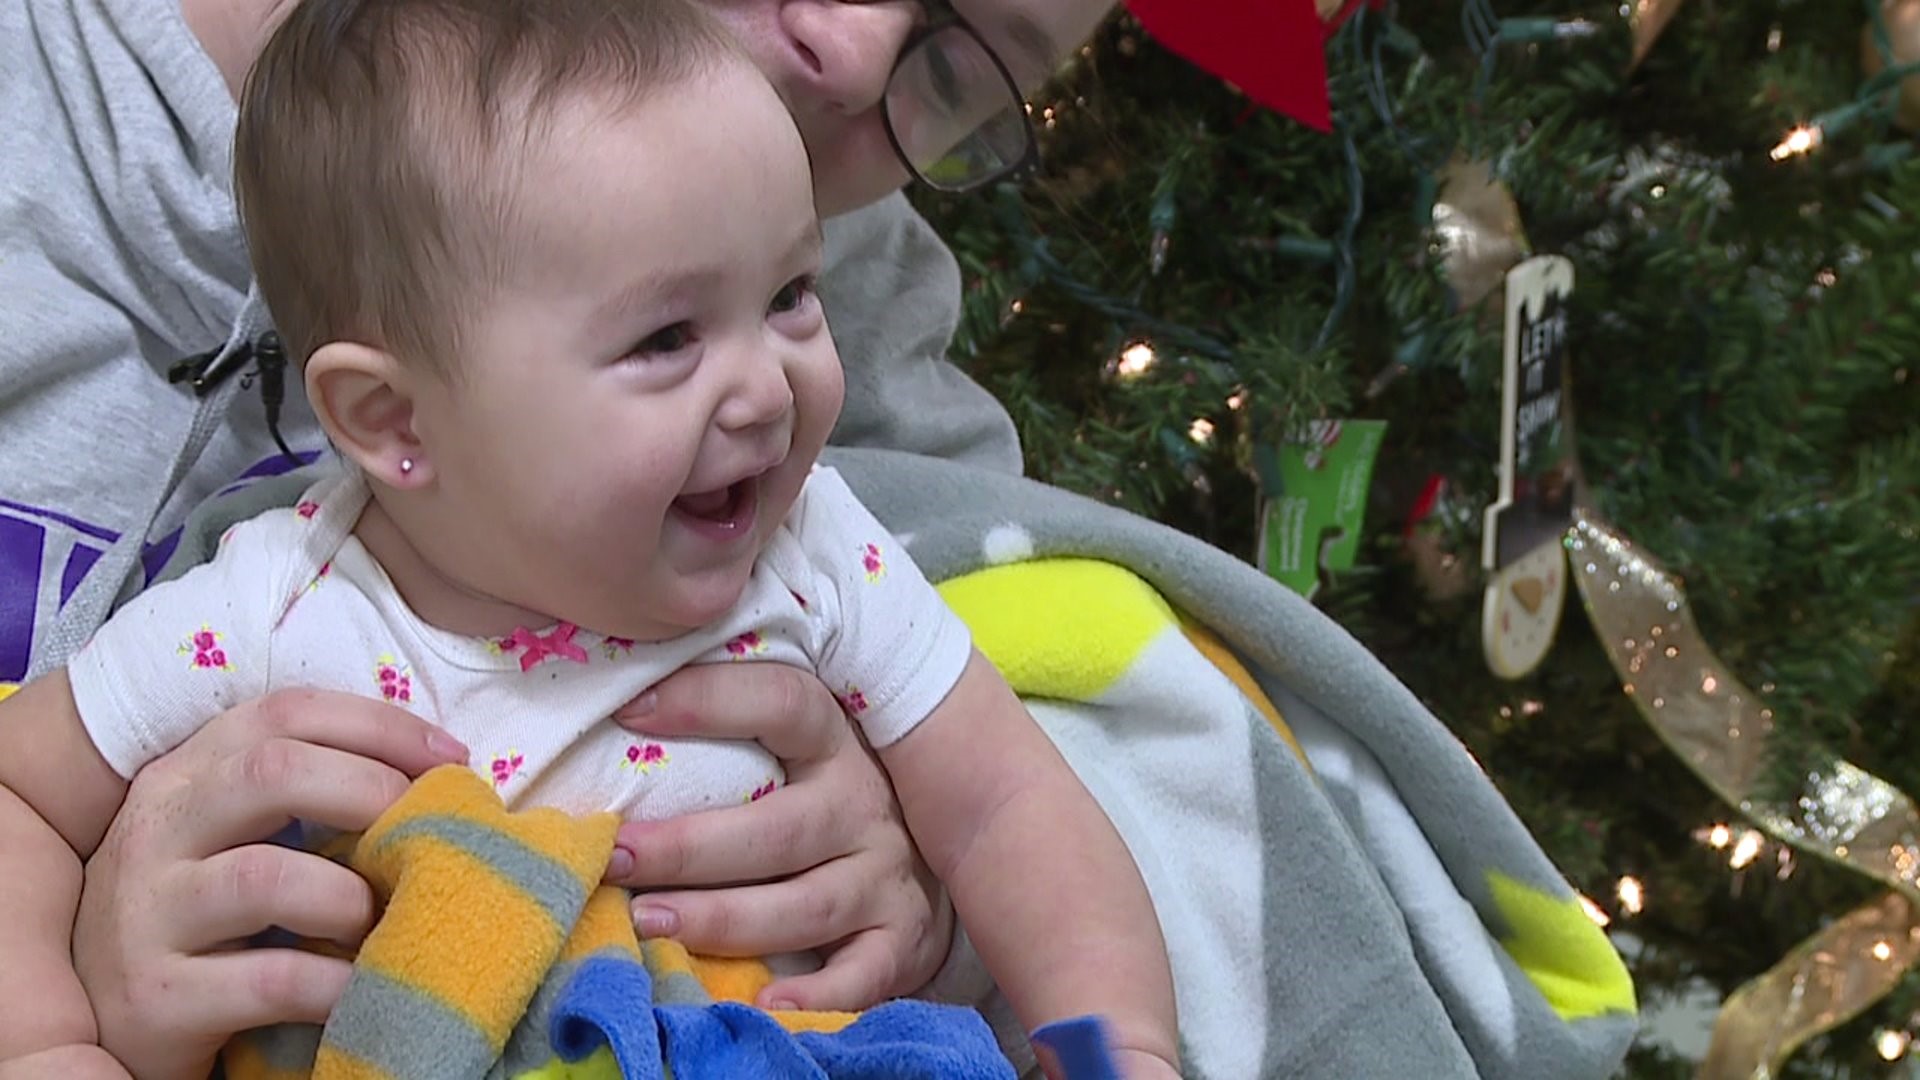 Families in homeless shelter benefit from handmade blankets